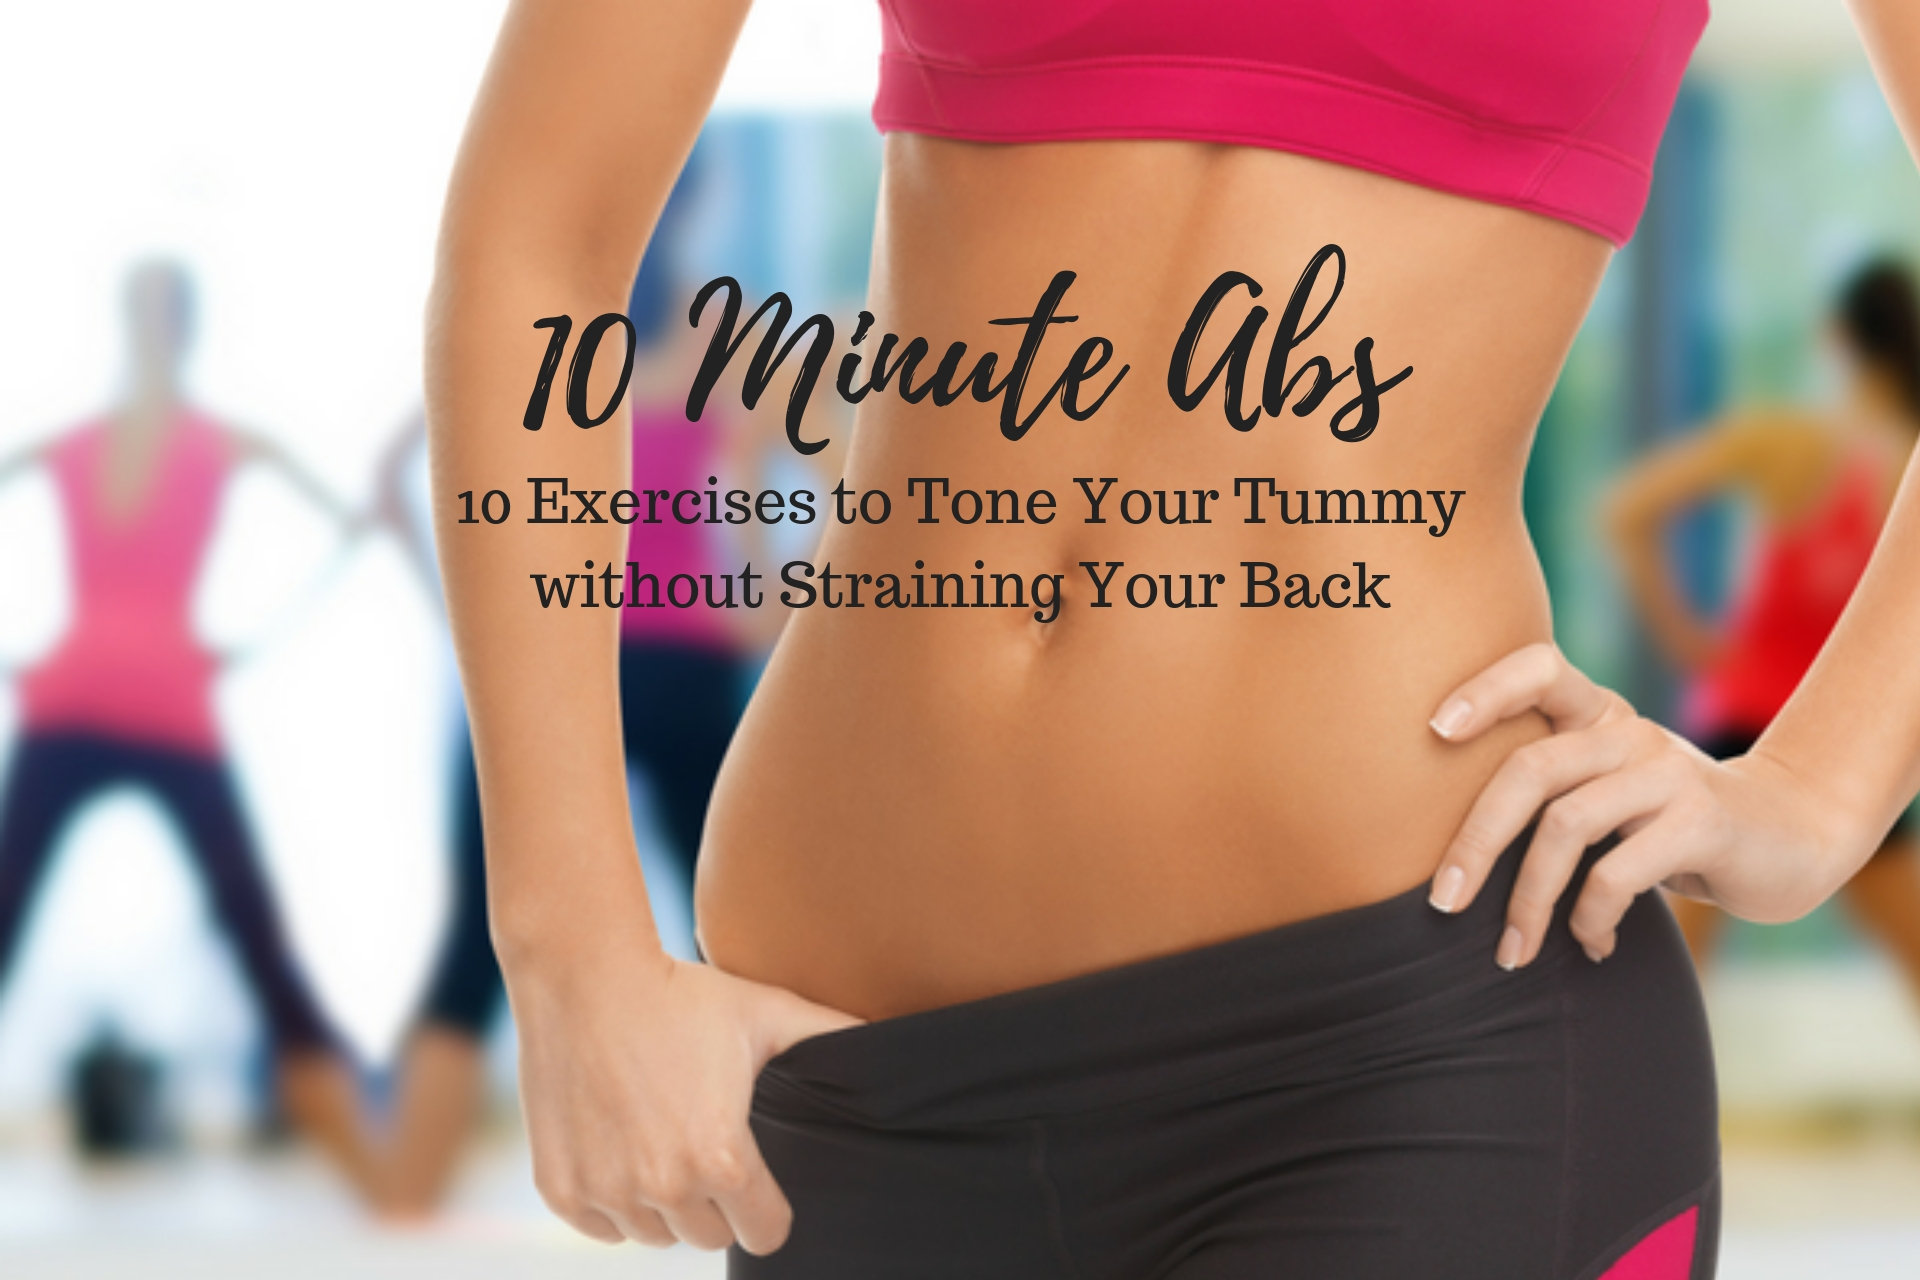 10 Minute Abs (10 Exercises to Tone your Tummy without Straining Your Back)  - Jen Roland